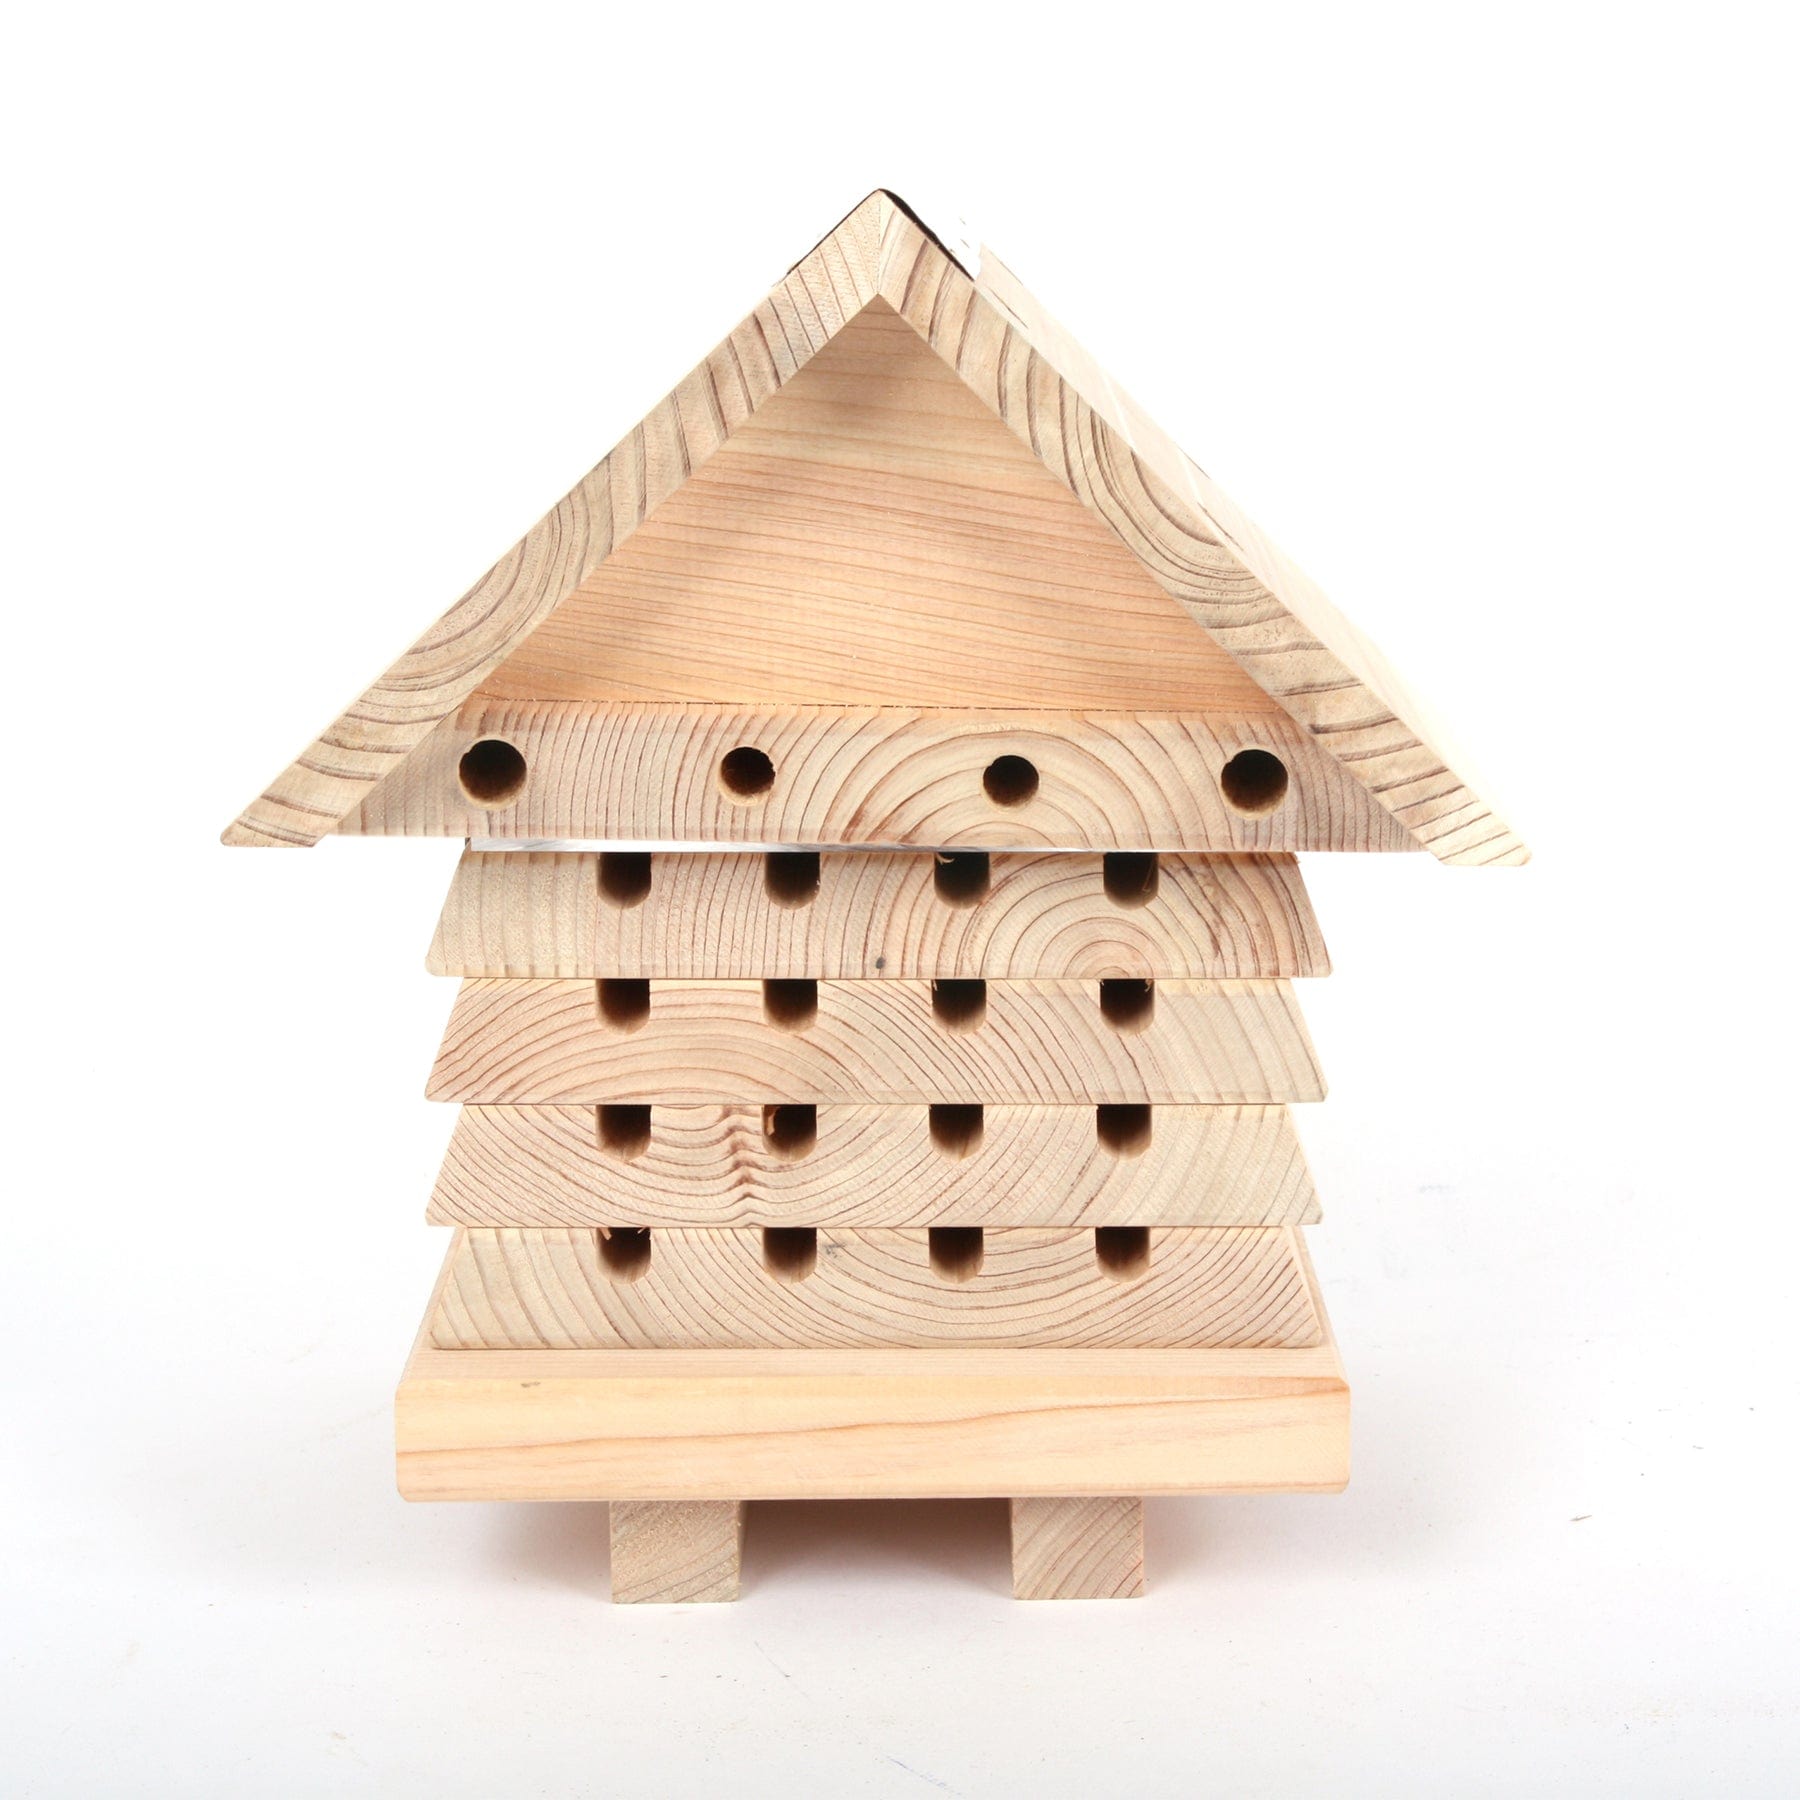 Stacking solitary bee hive